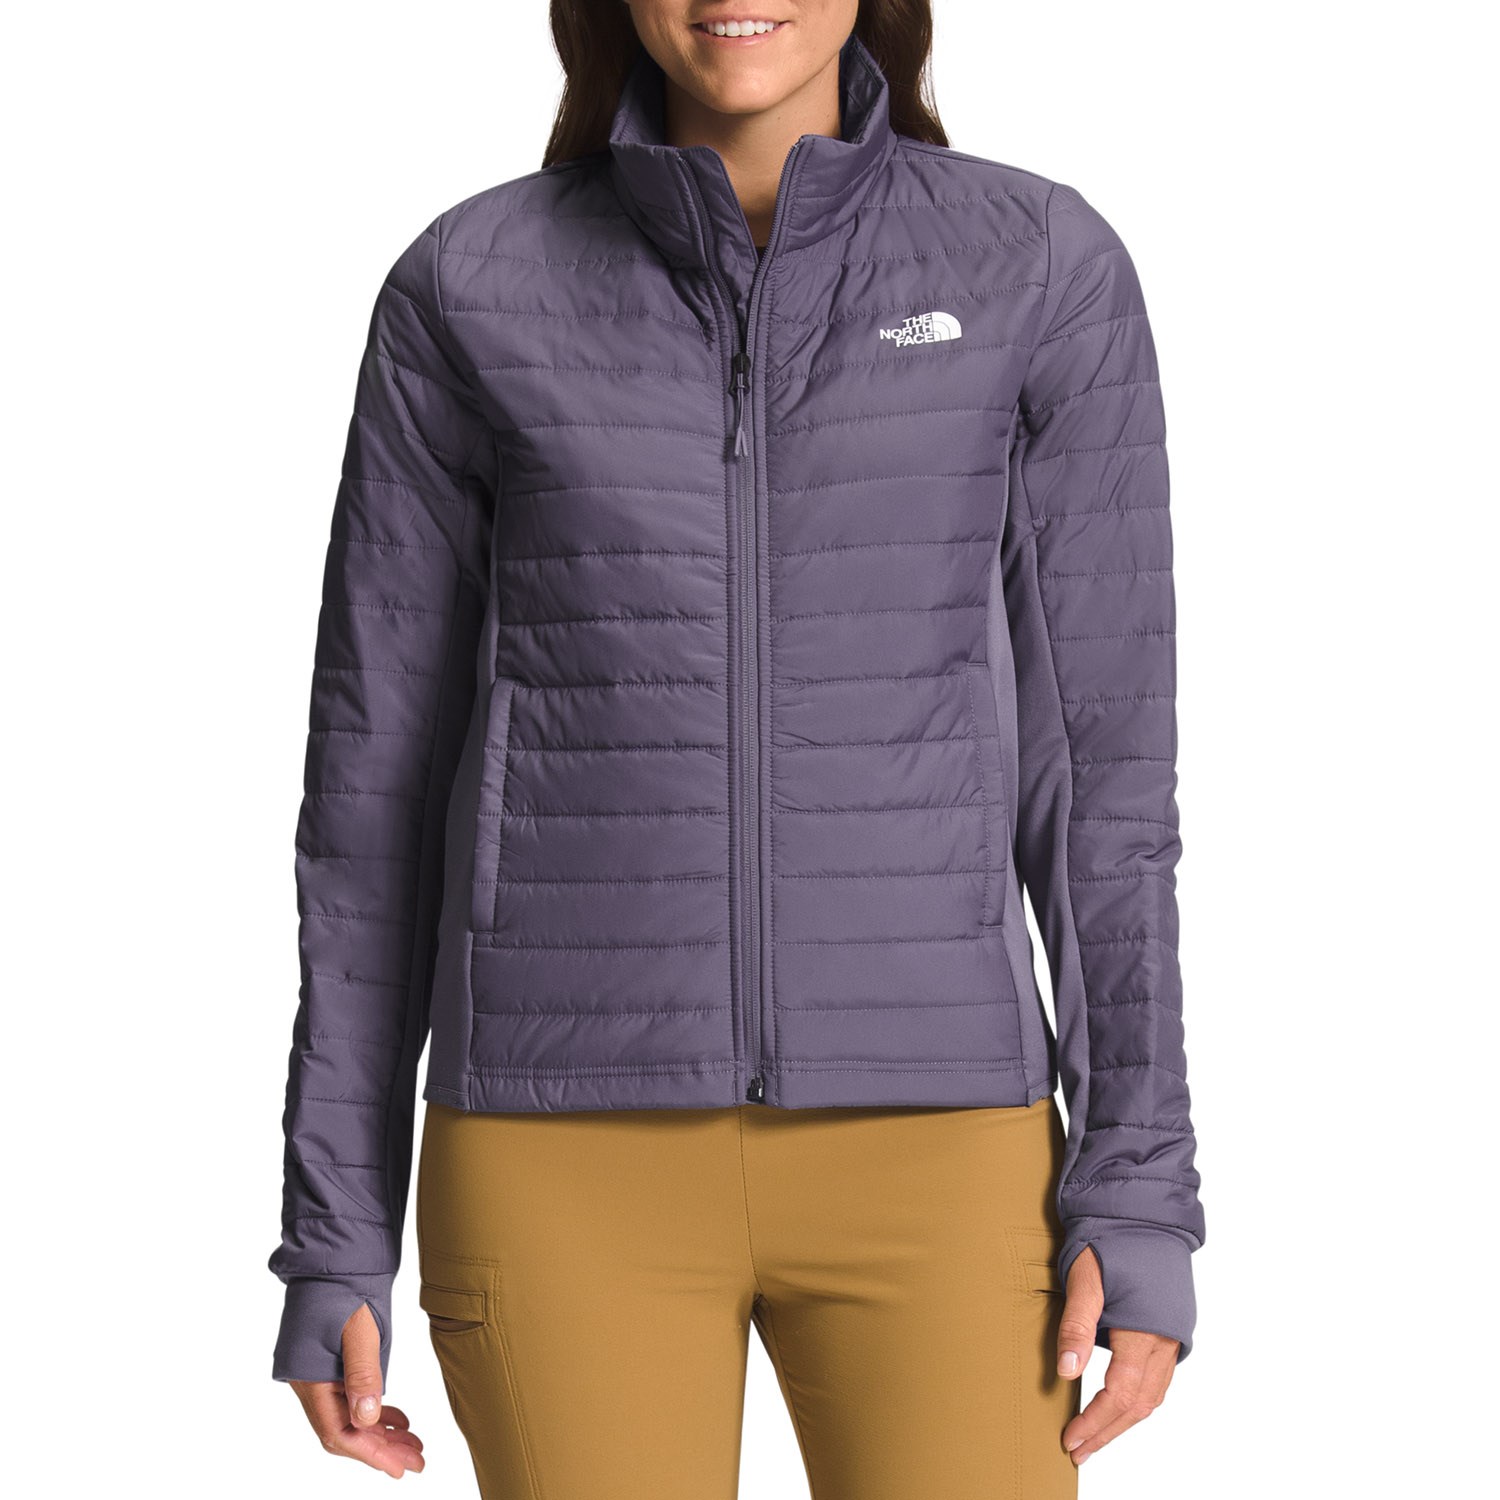 The North Face Canyonlands Hybrid Jacket Men's Clearance